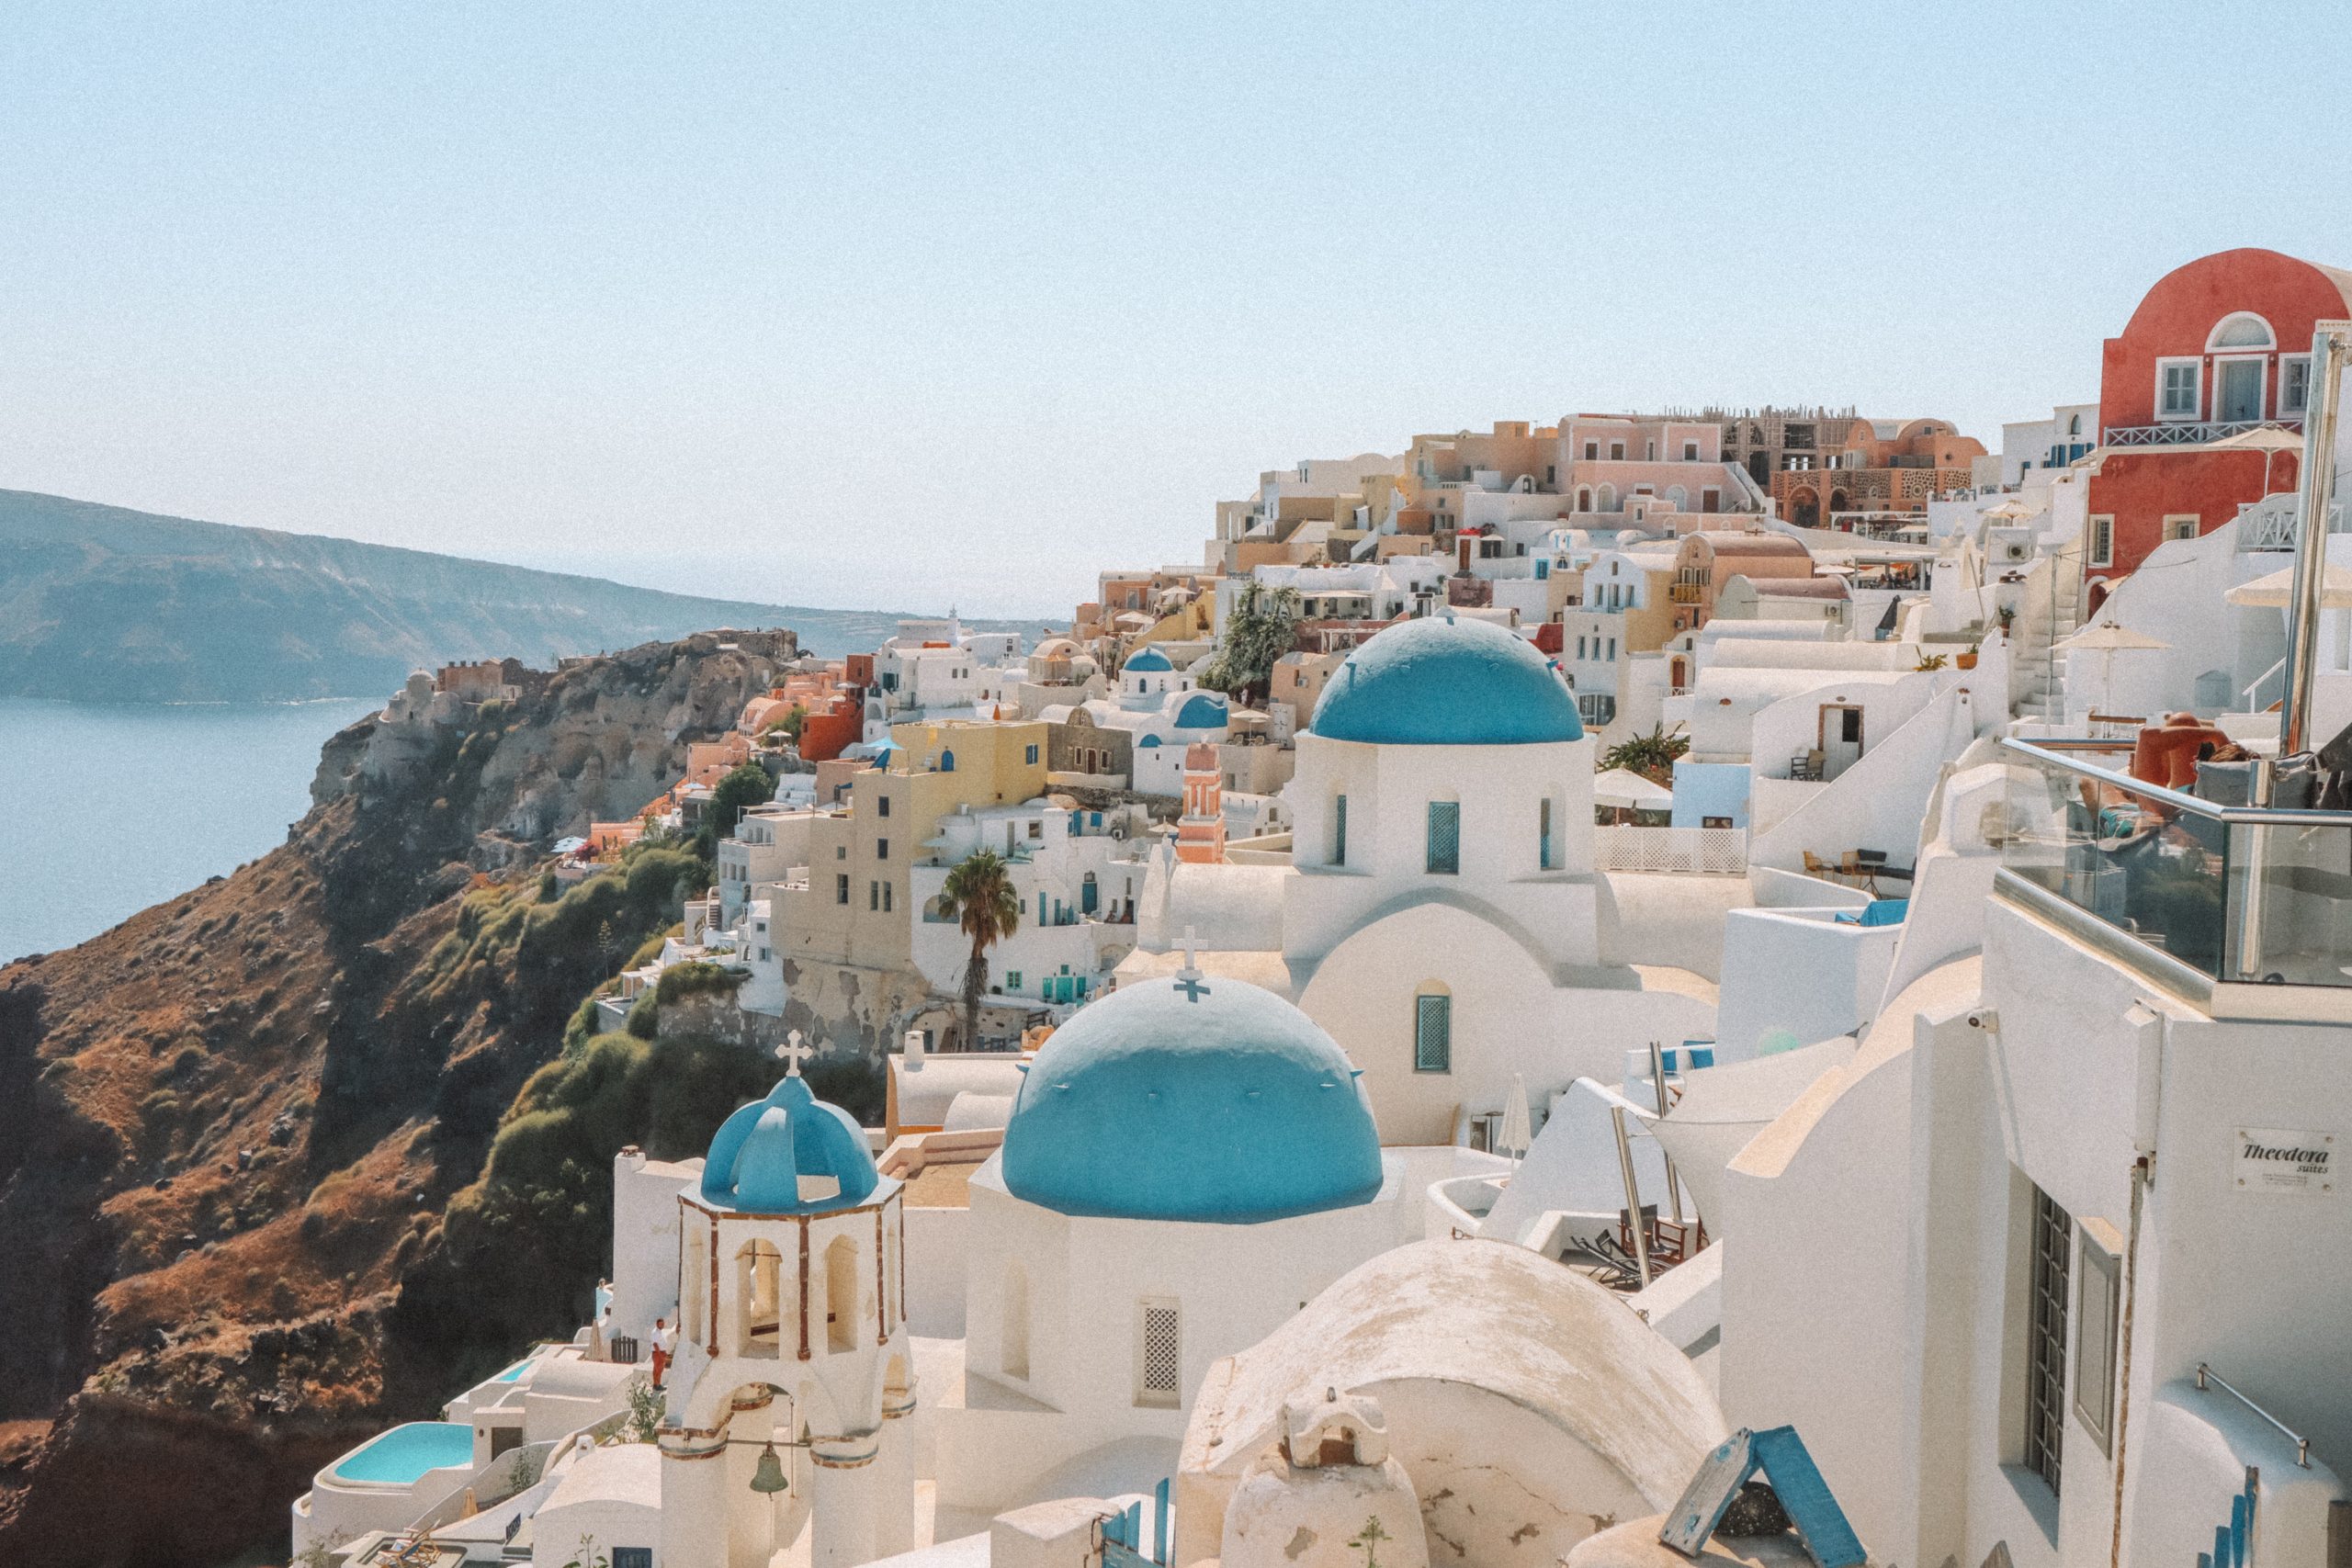 A view of blue domed churches in Oia